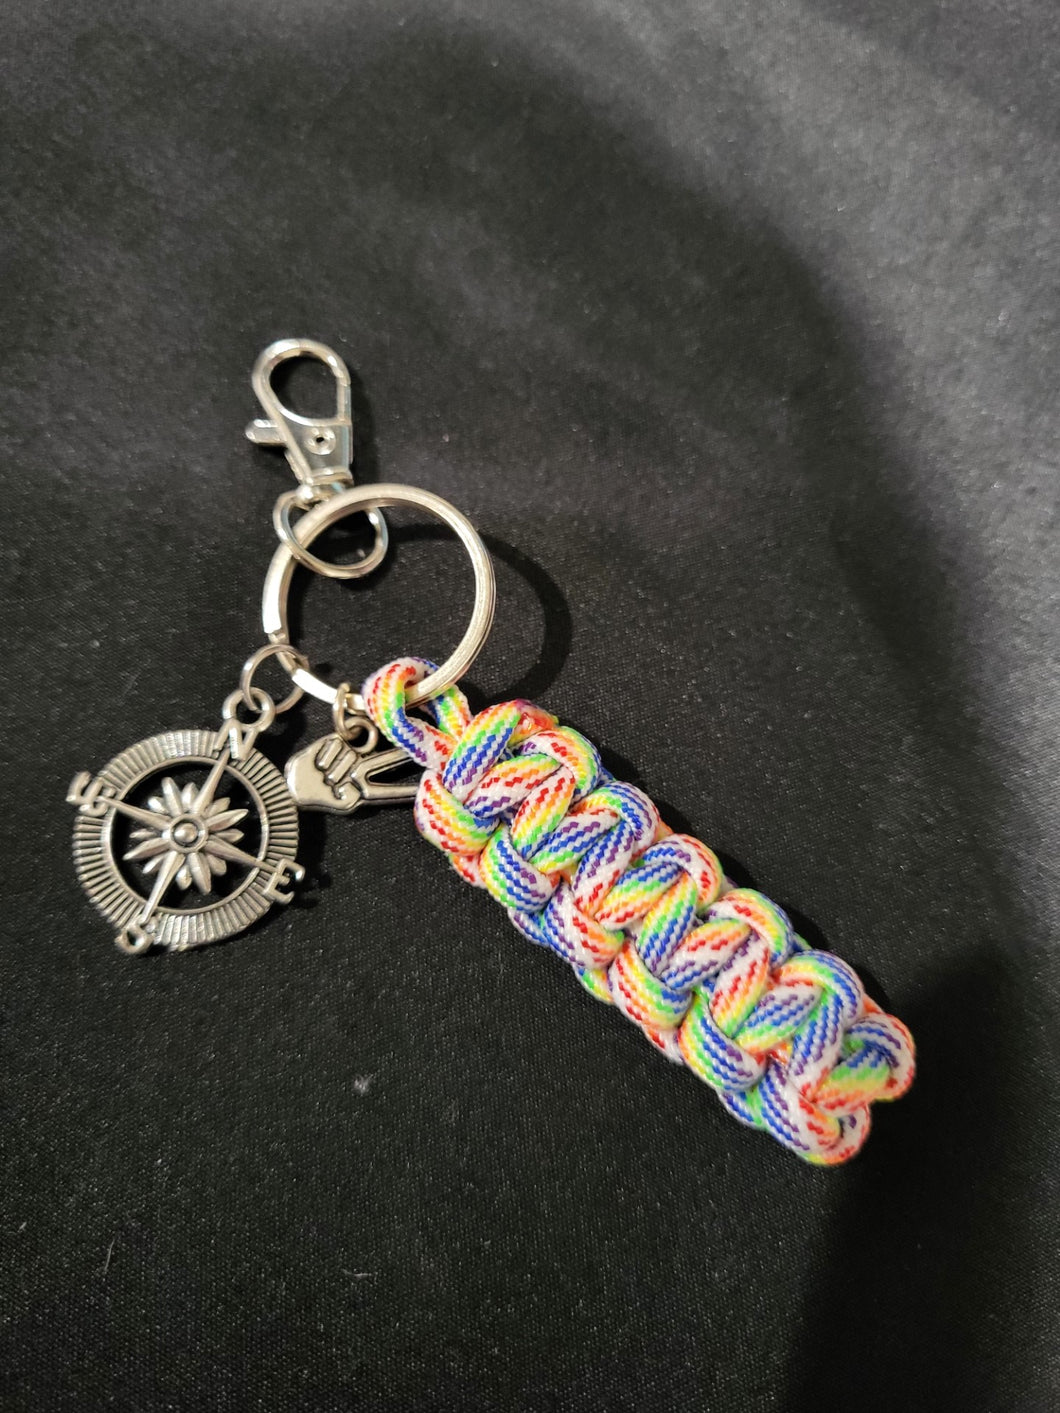 Paracord Key Chain- Rainbow With Compass Charms